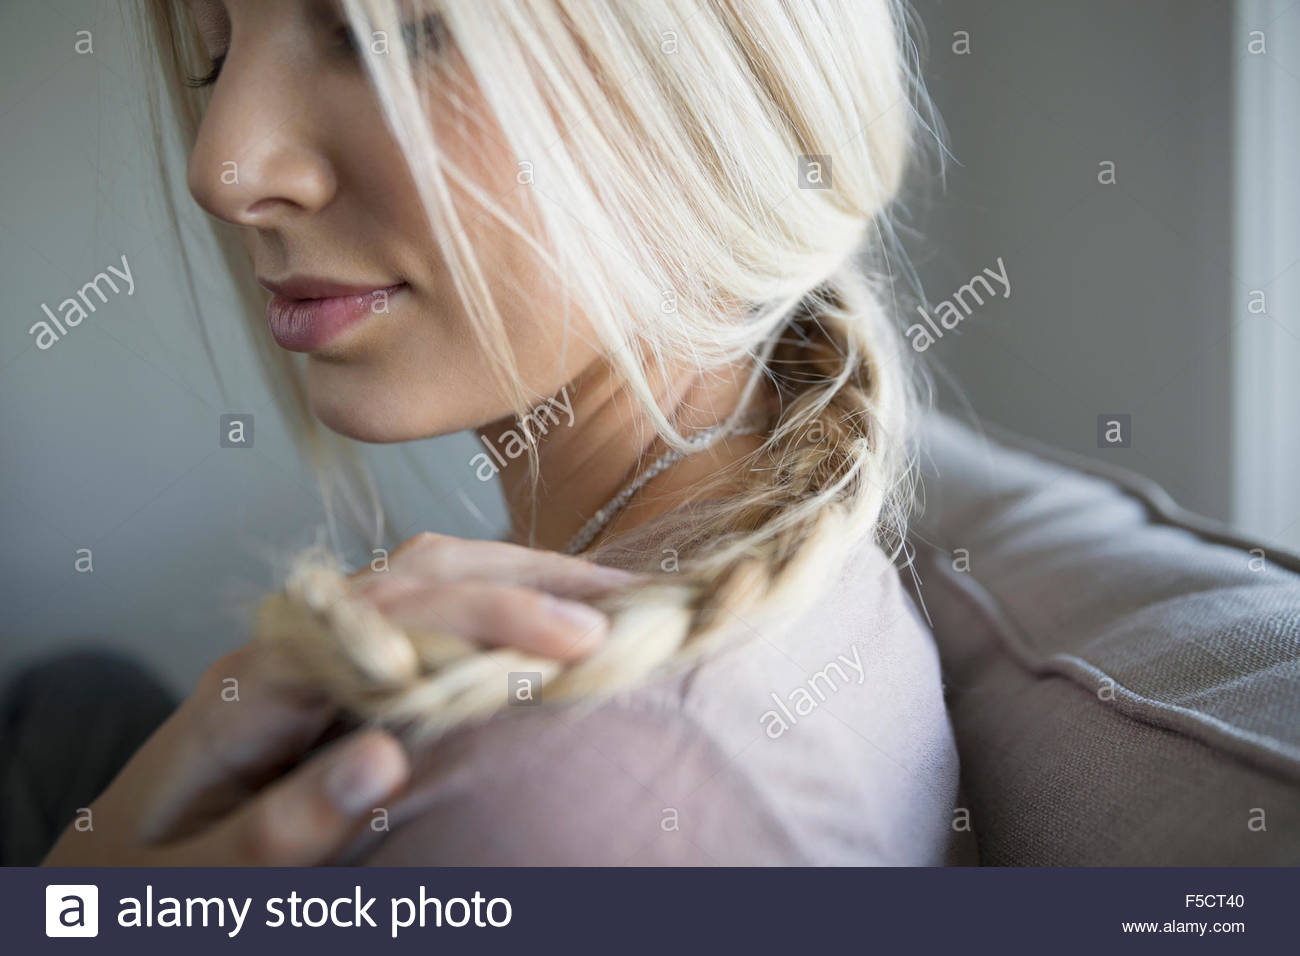 Close up blonde young woman holding braid Stock Photo